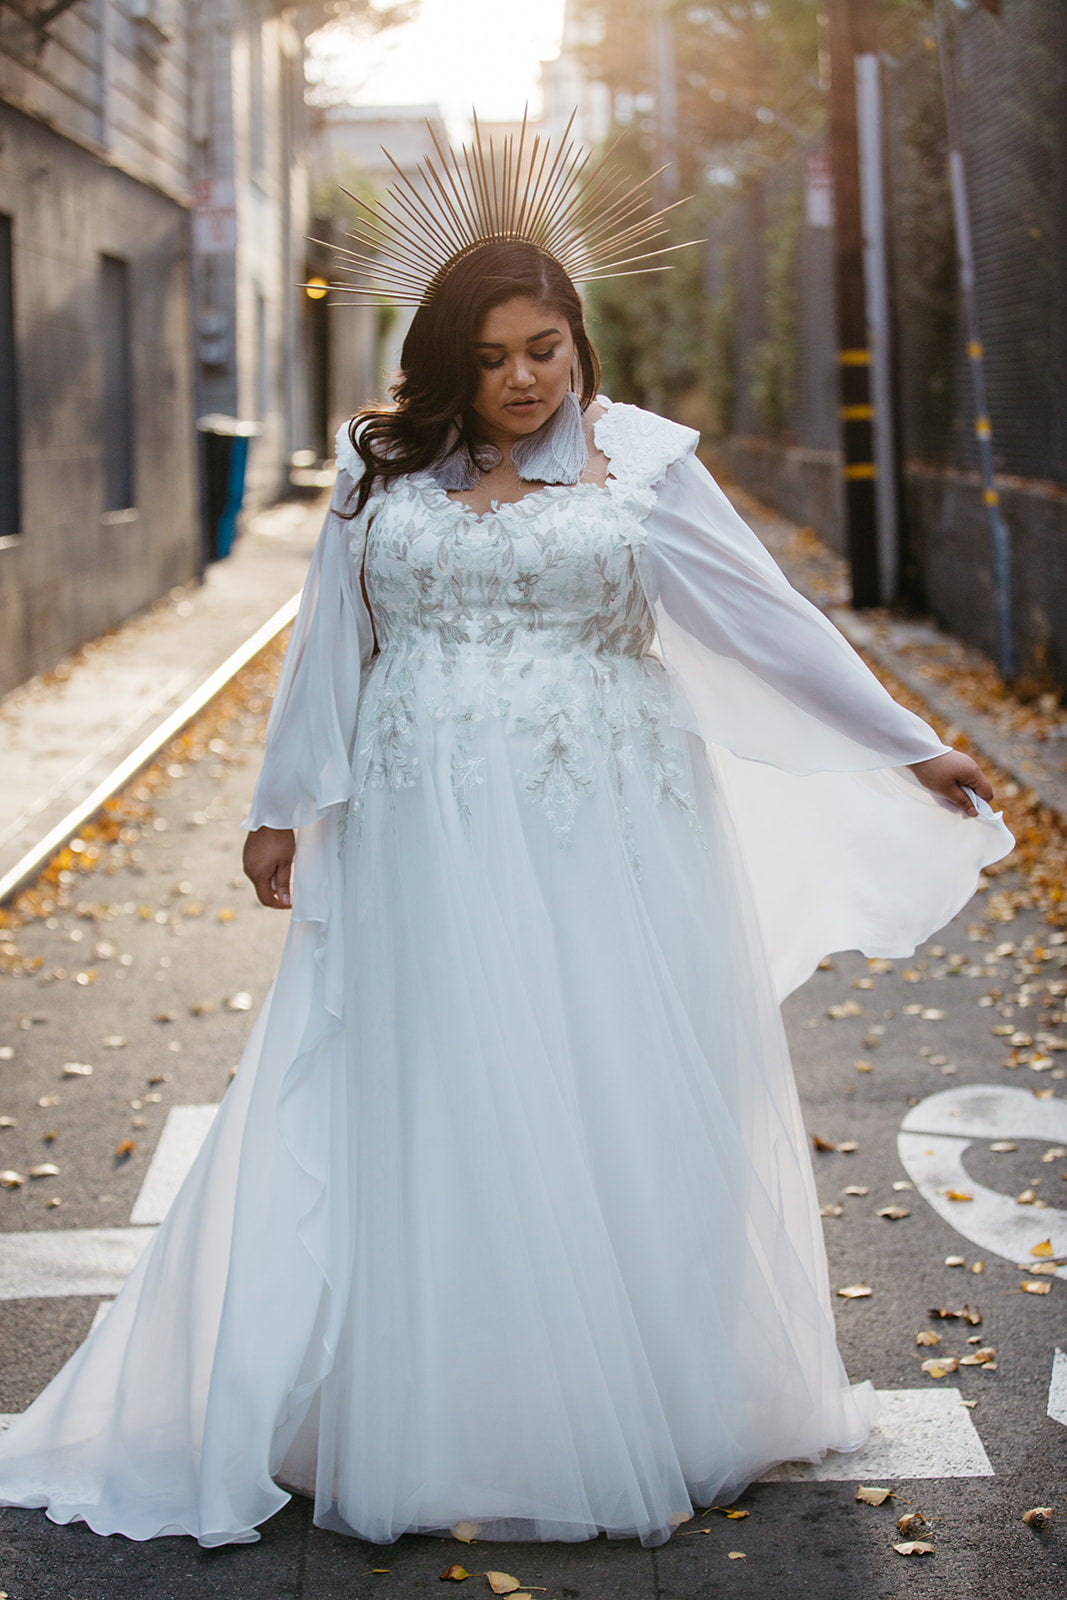 wedding gown for plus size